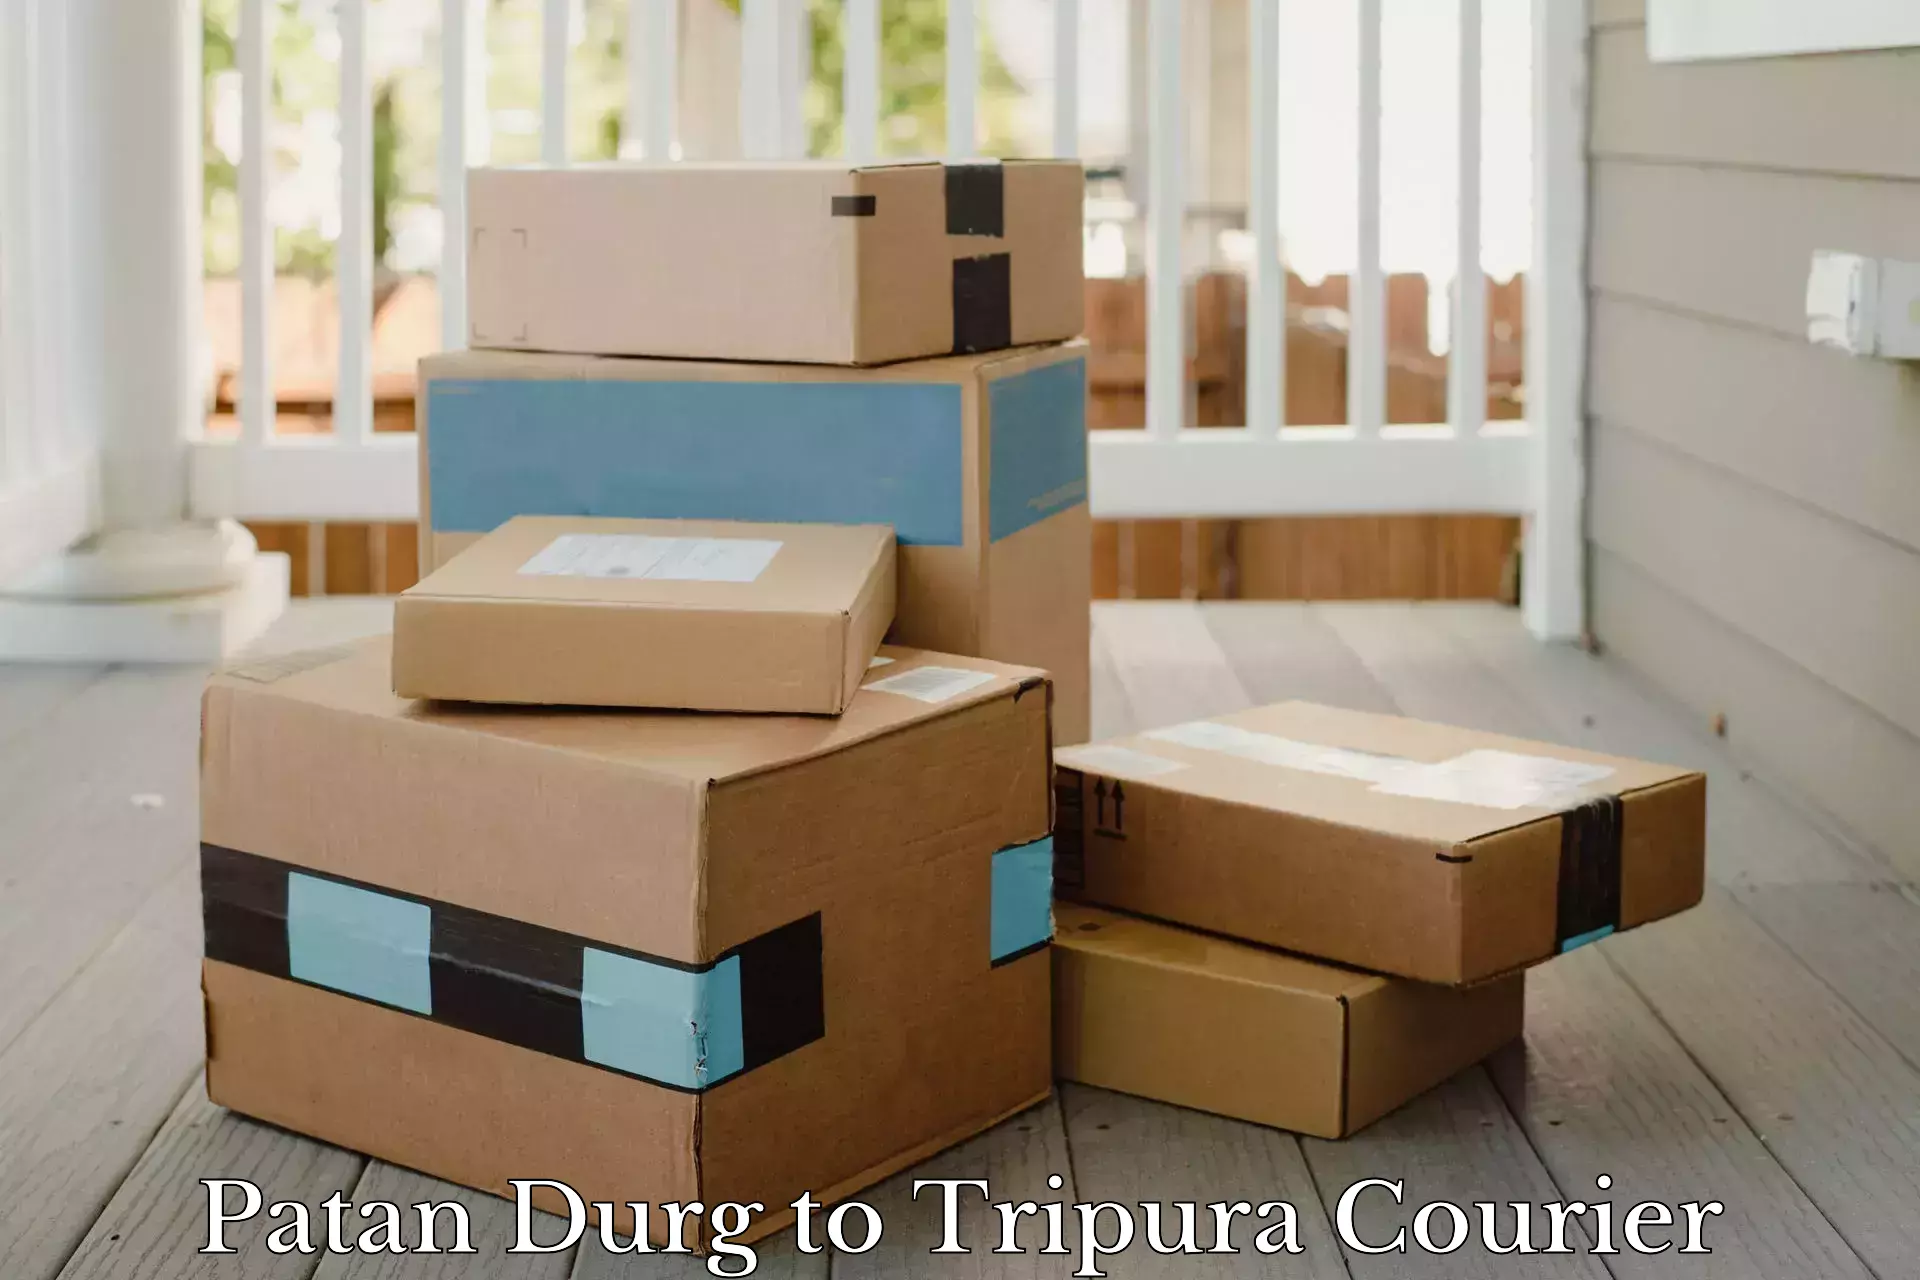 Optimized delivery routes Patan Durg to Tripura